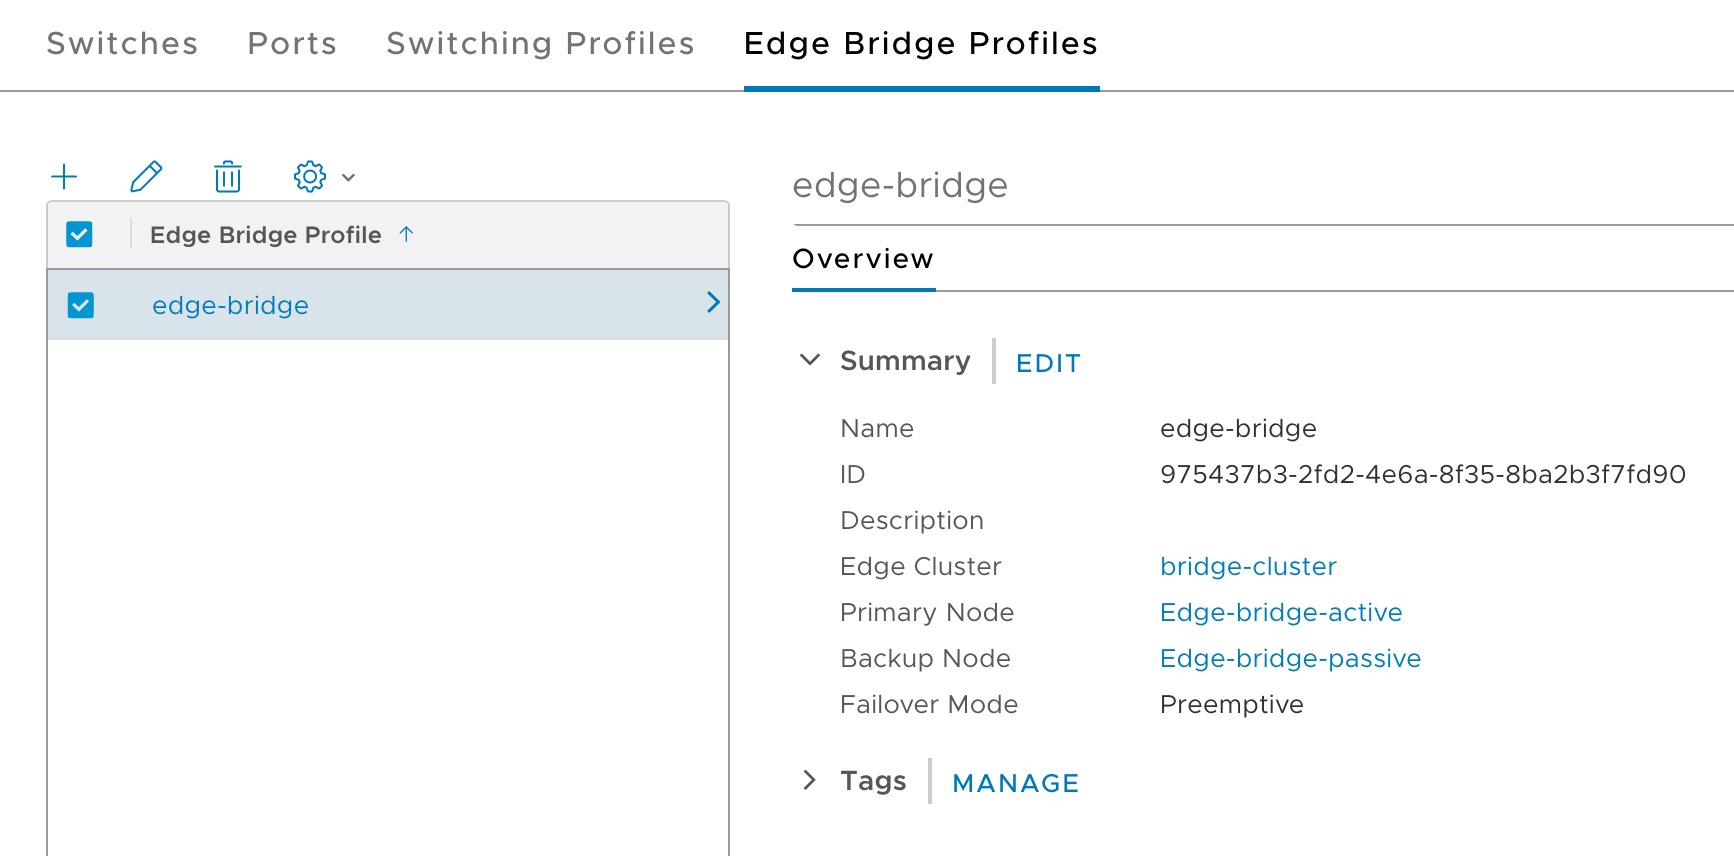 Detail of an edge bridge profile created with primary and backup edge nodes for bridging